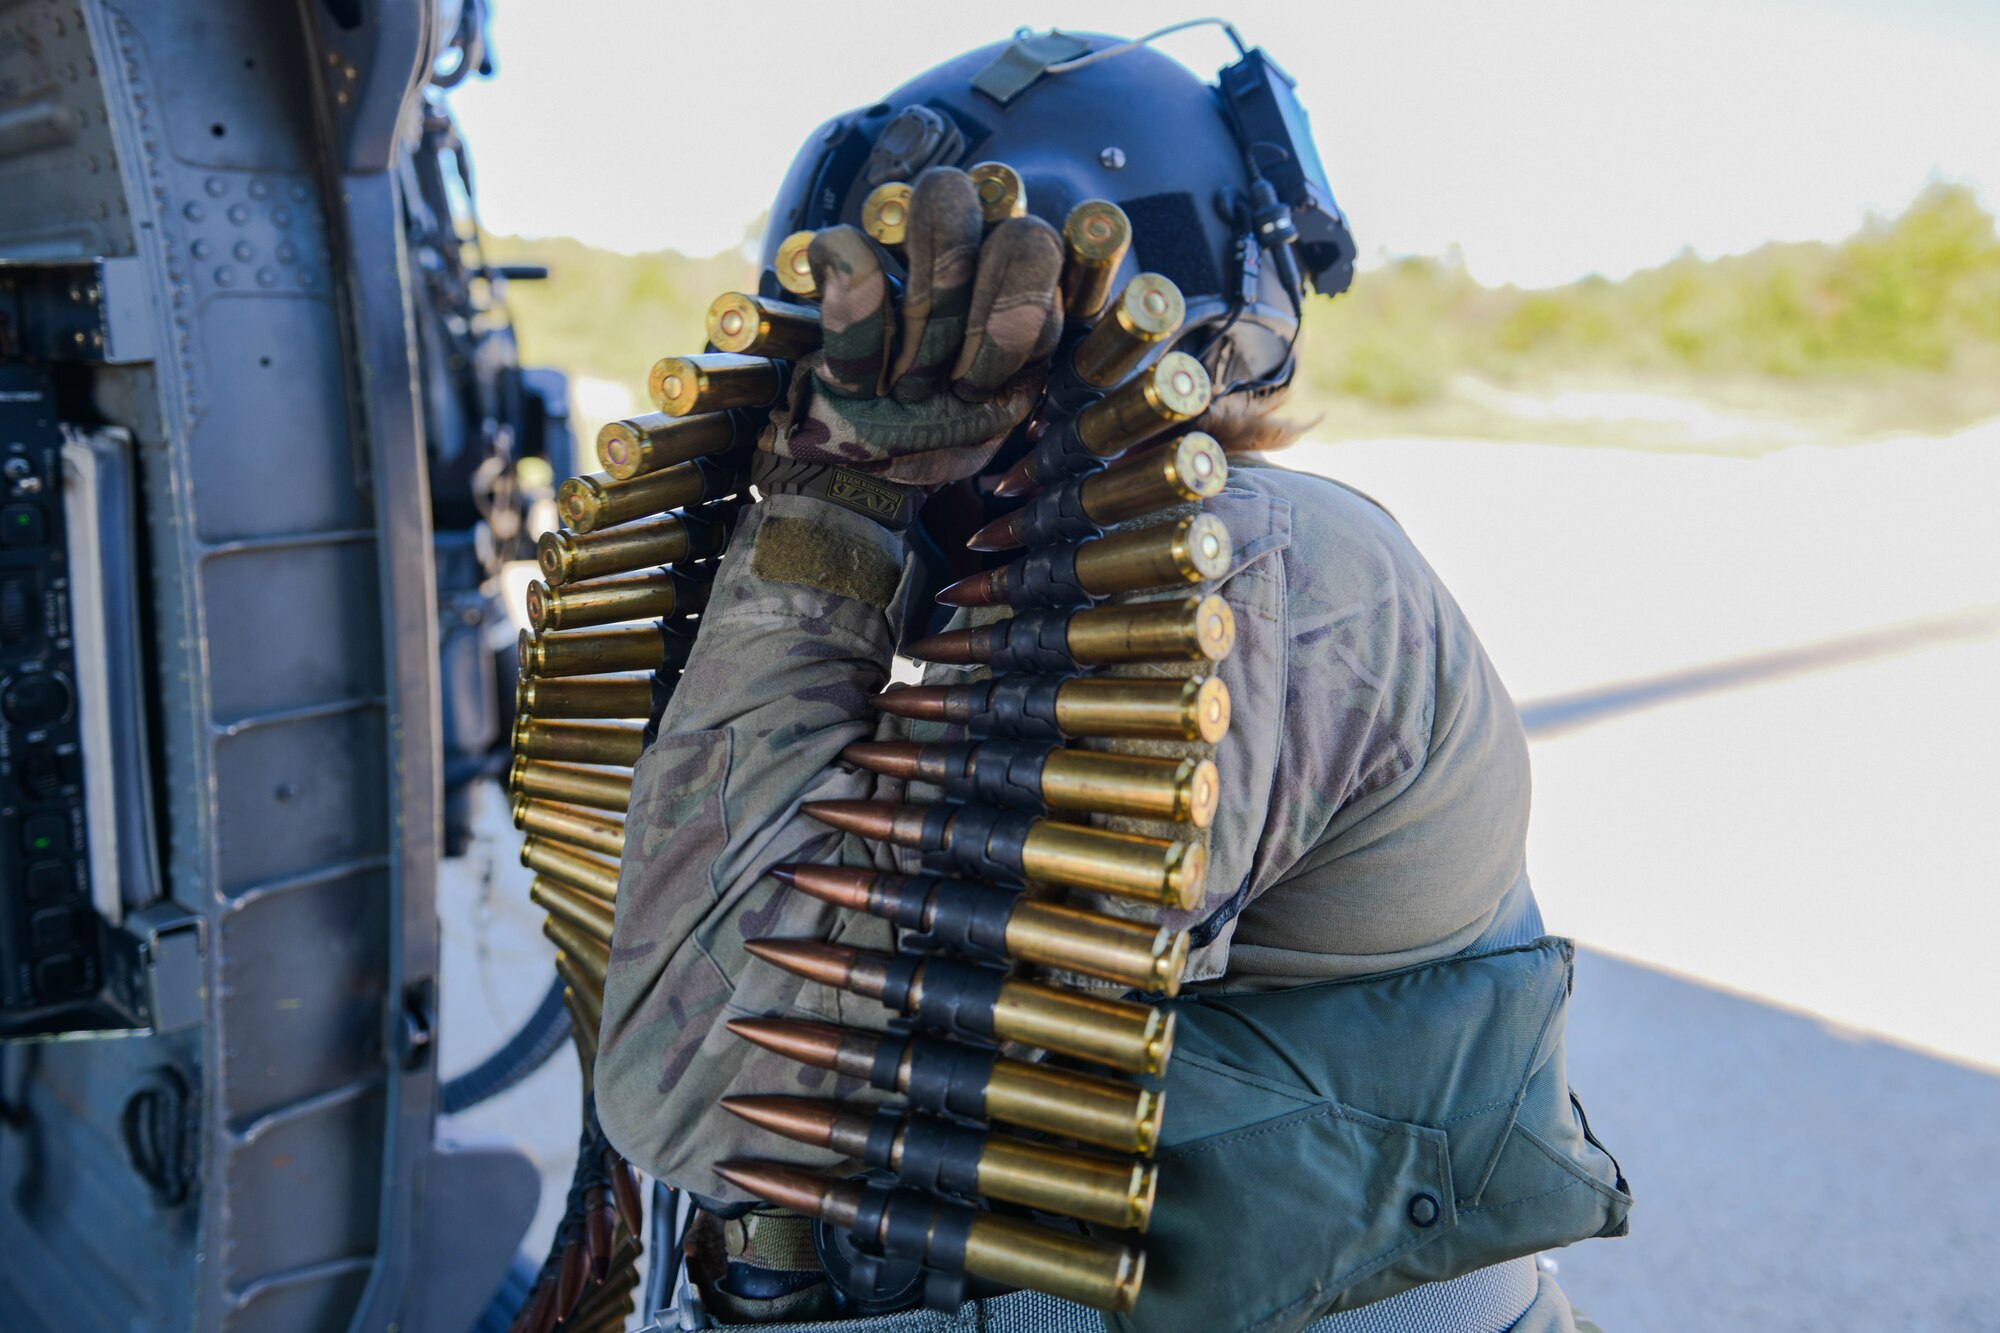 U.S. Air Force Staff Sgt. Kinga Hudson, 56th Rescue Squadron special missions aviator, loads ammunition onto an HH-60G Pave Hawk in Croatia, Sept. 23, 2021. Three crew members completed .50 caliber and mini gun training during the sortie. (U.S. Air Force photo by Senior Airman Brooke Moeder)